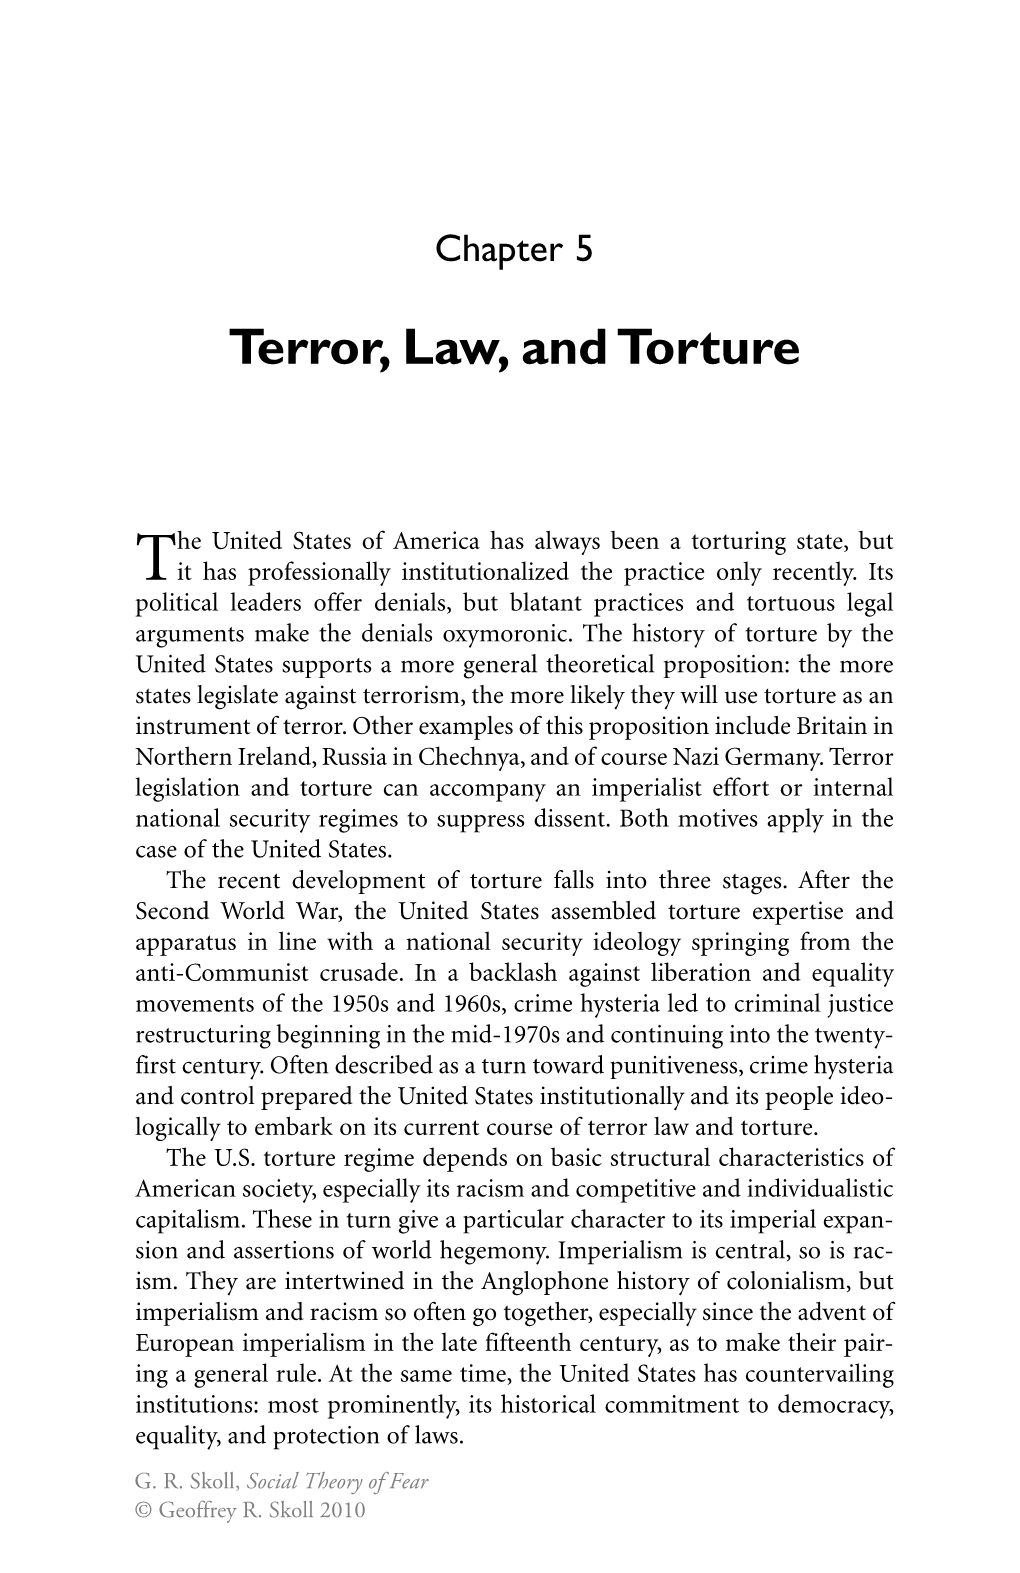 Terror, Law, and Torture